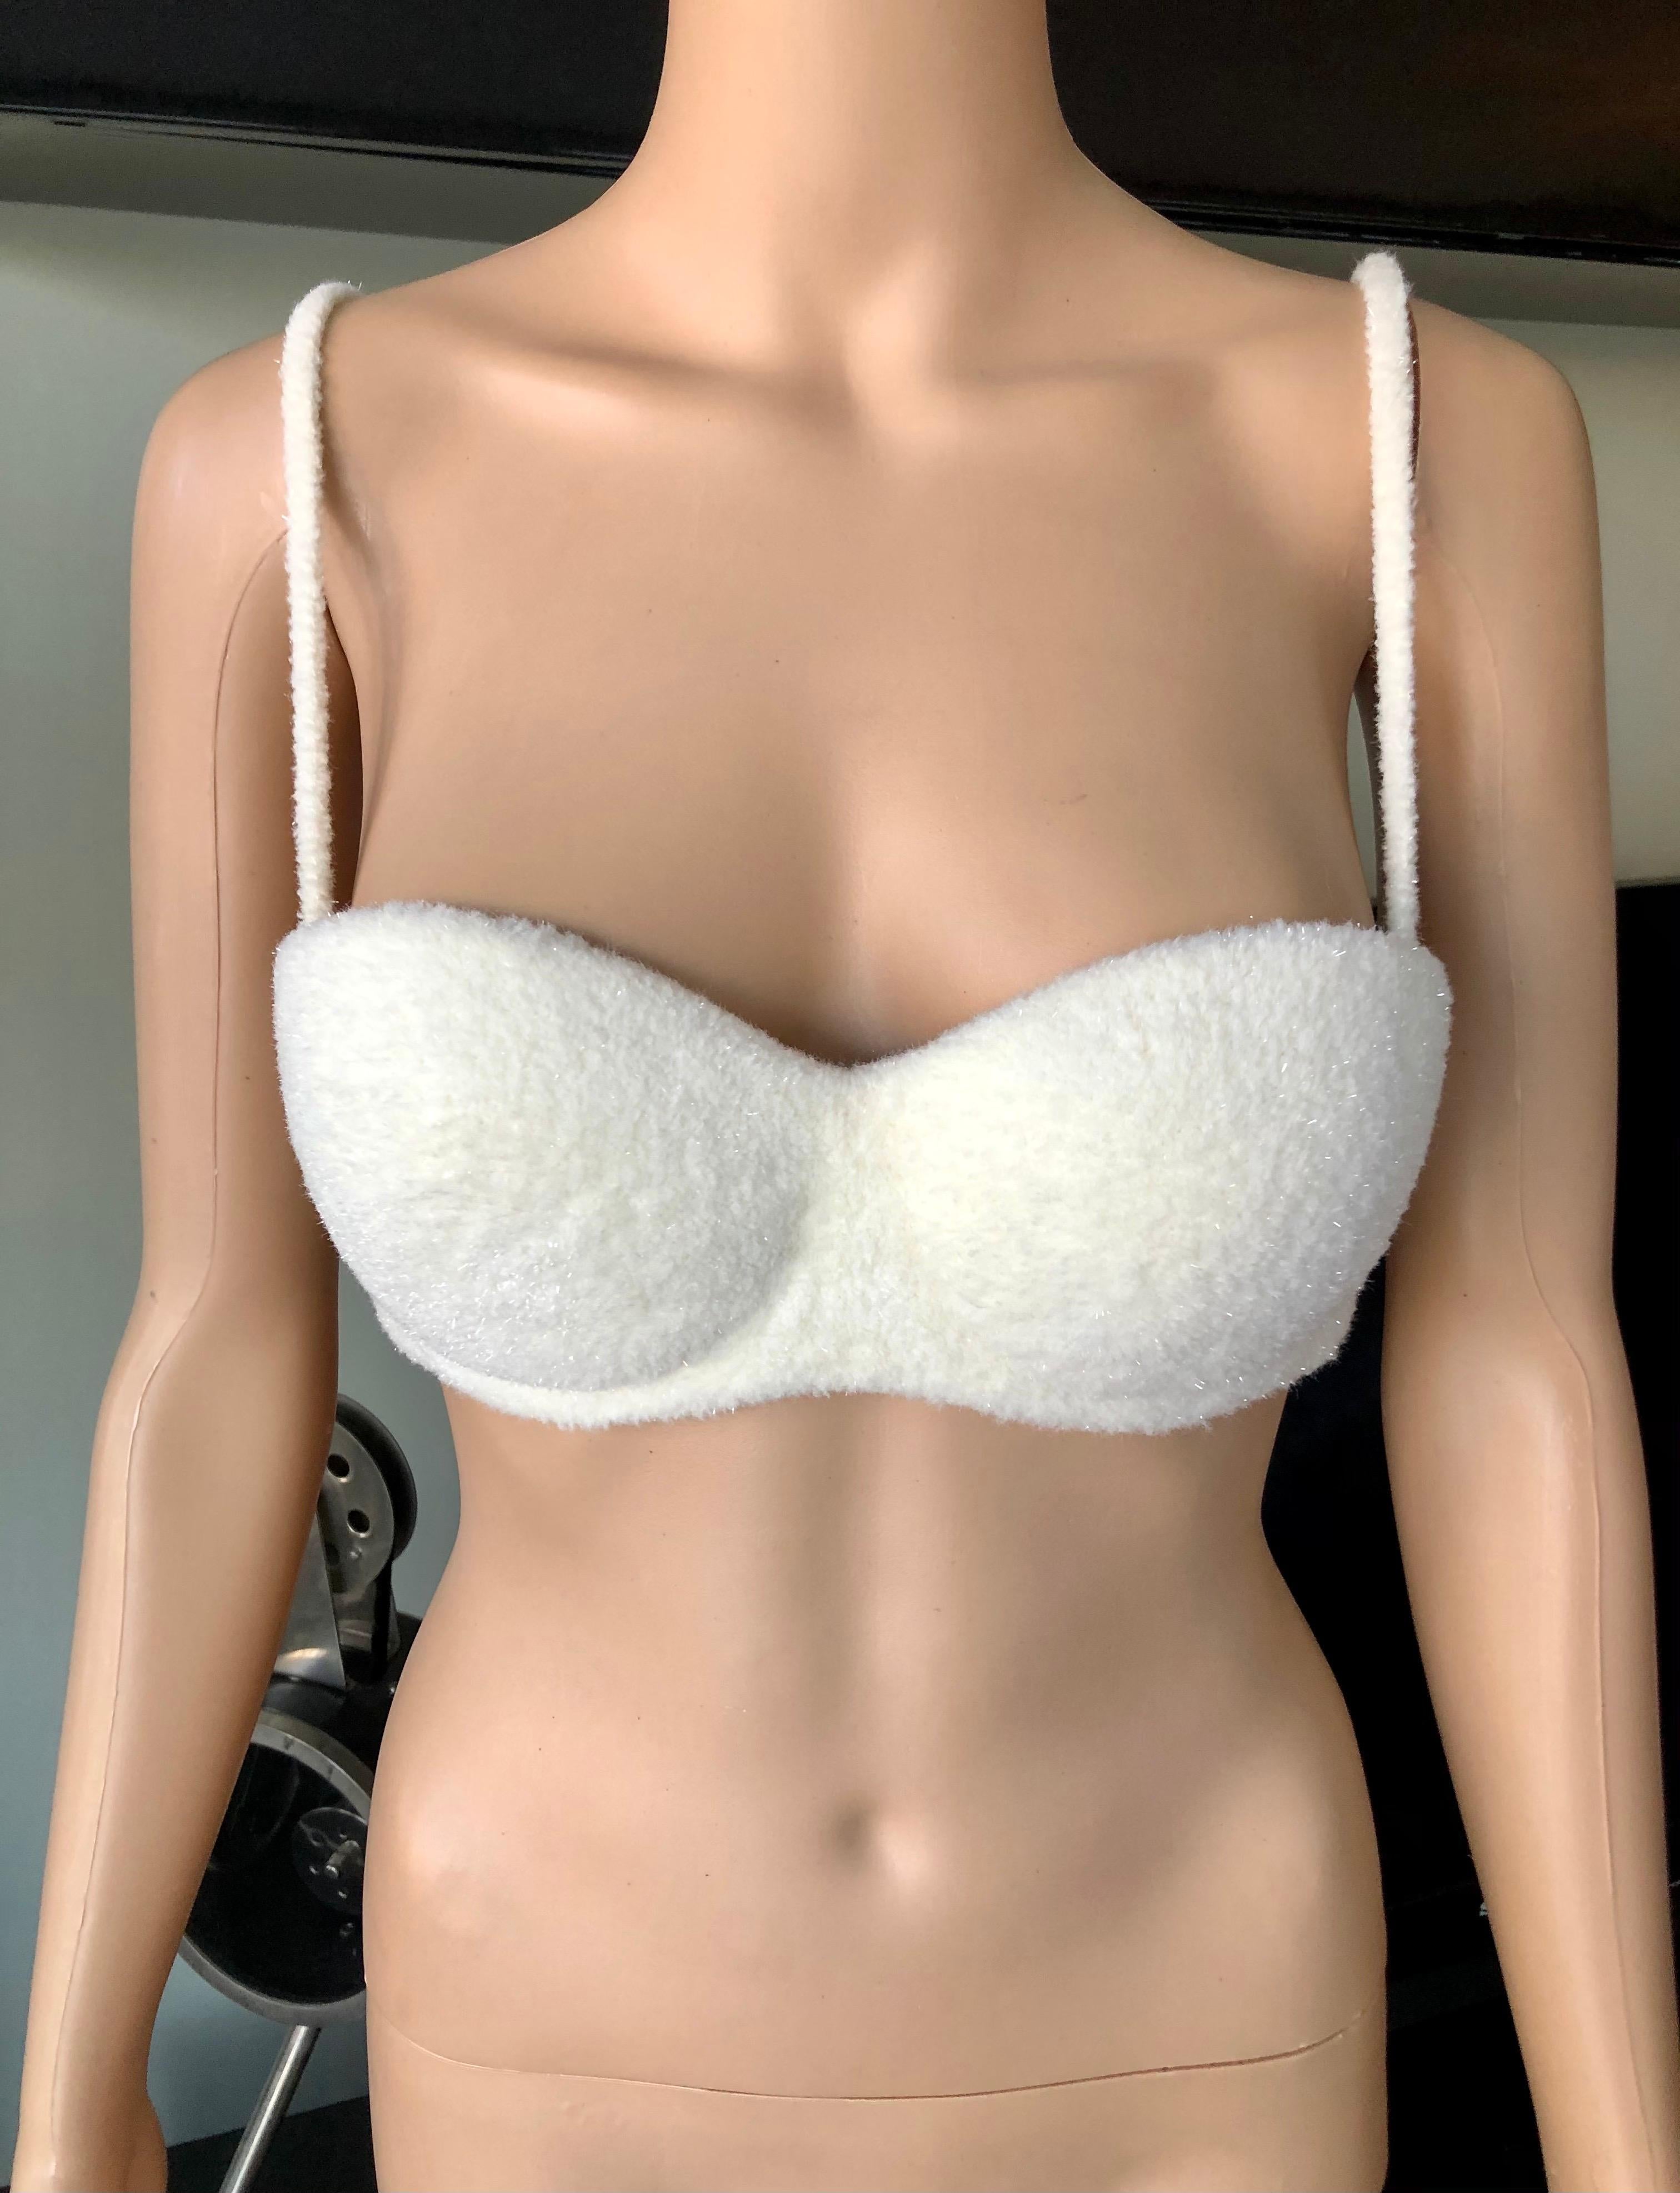 Azzedine Alaia F/W 1992 Runway Iconic Vintage Chenille Padded White Bra Bralette

Please note size tag is missing.

